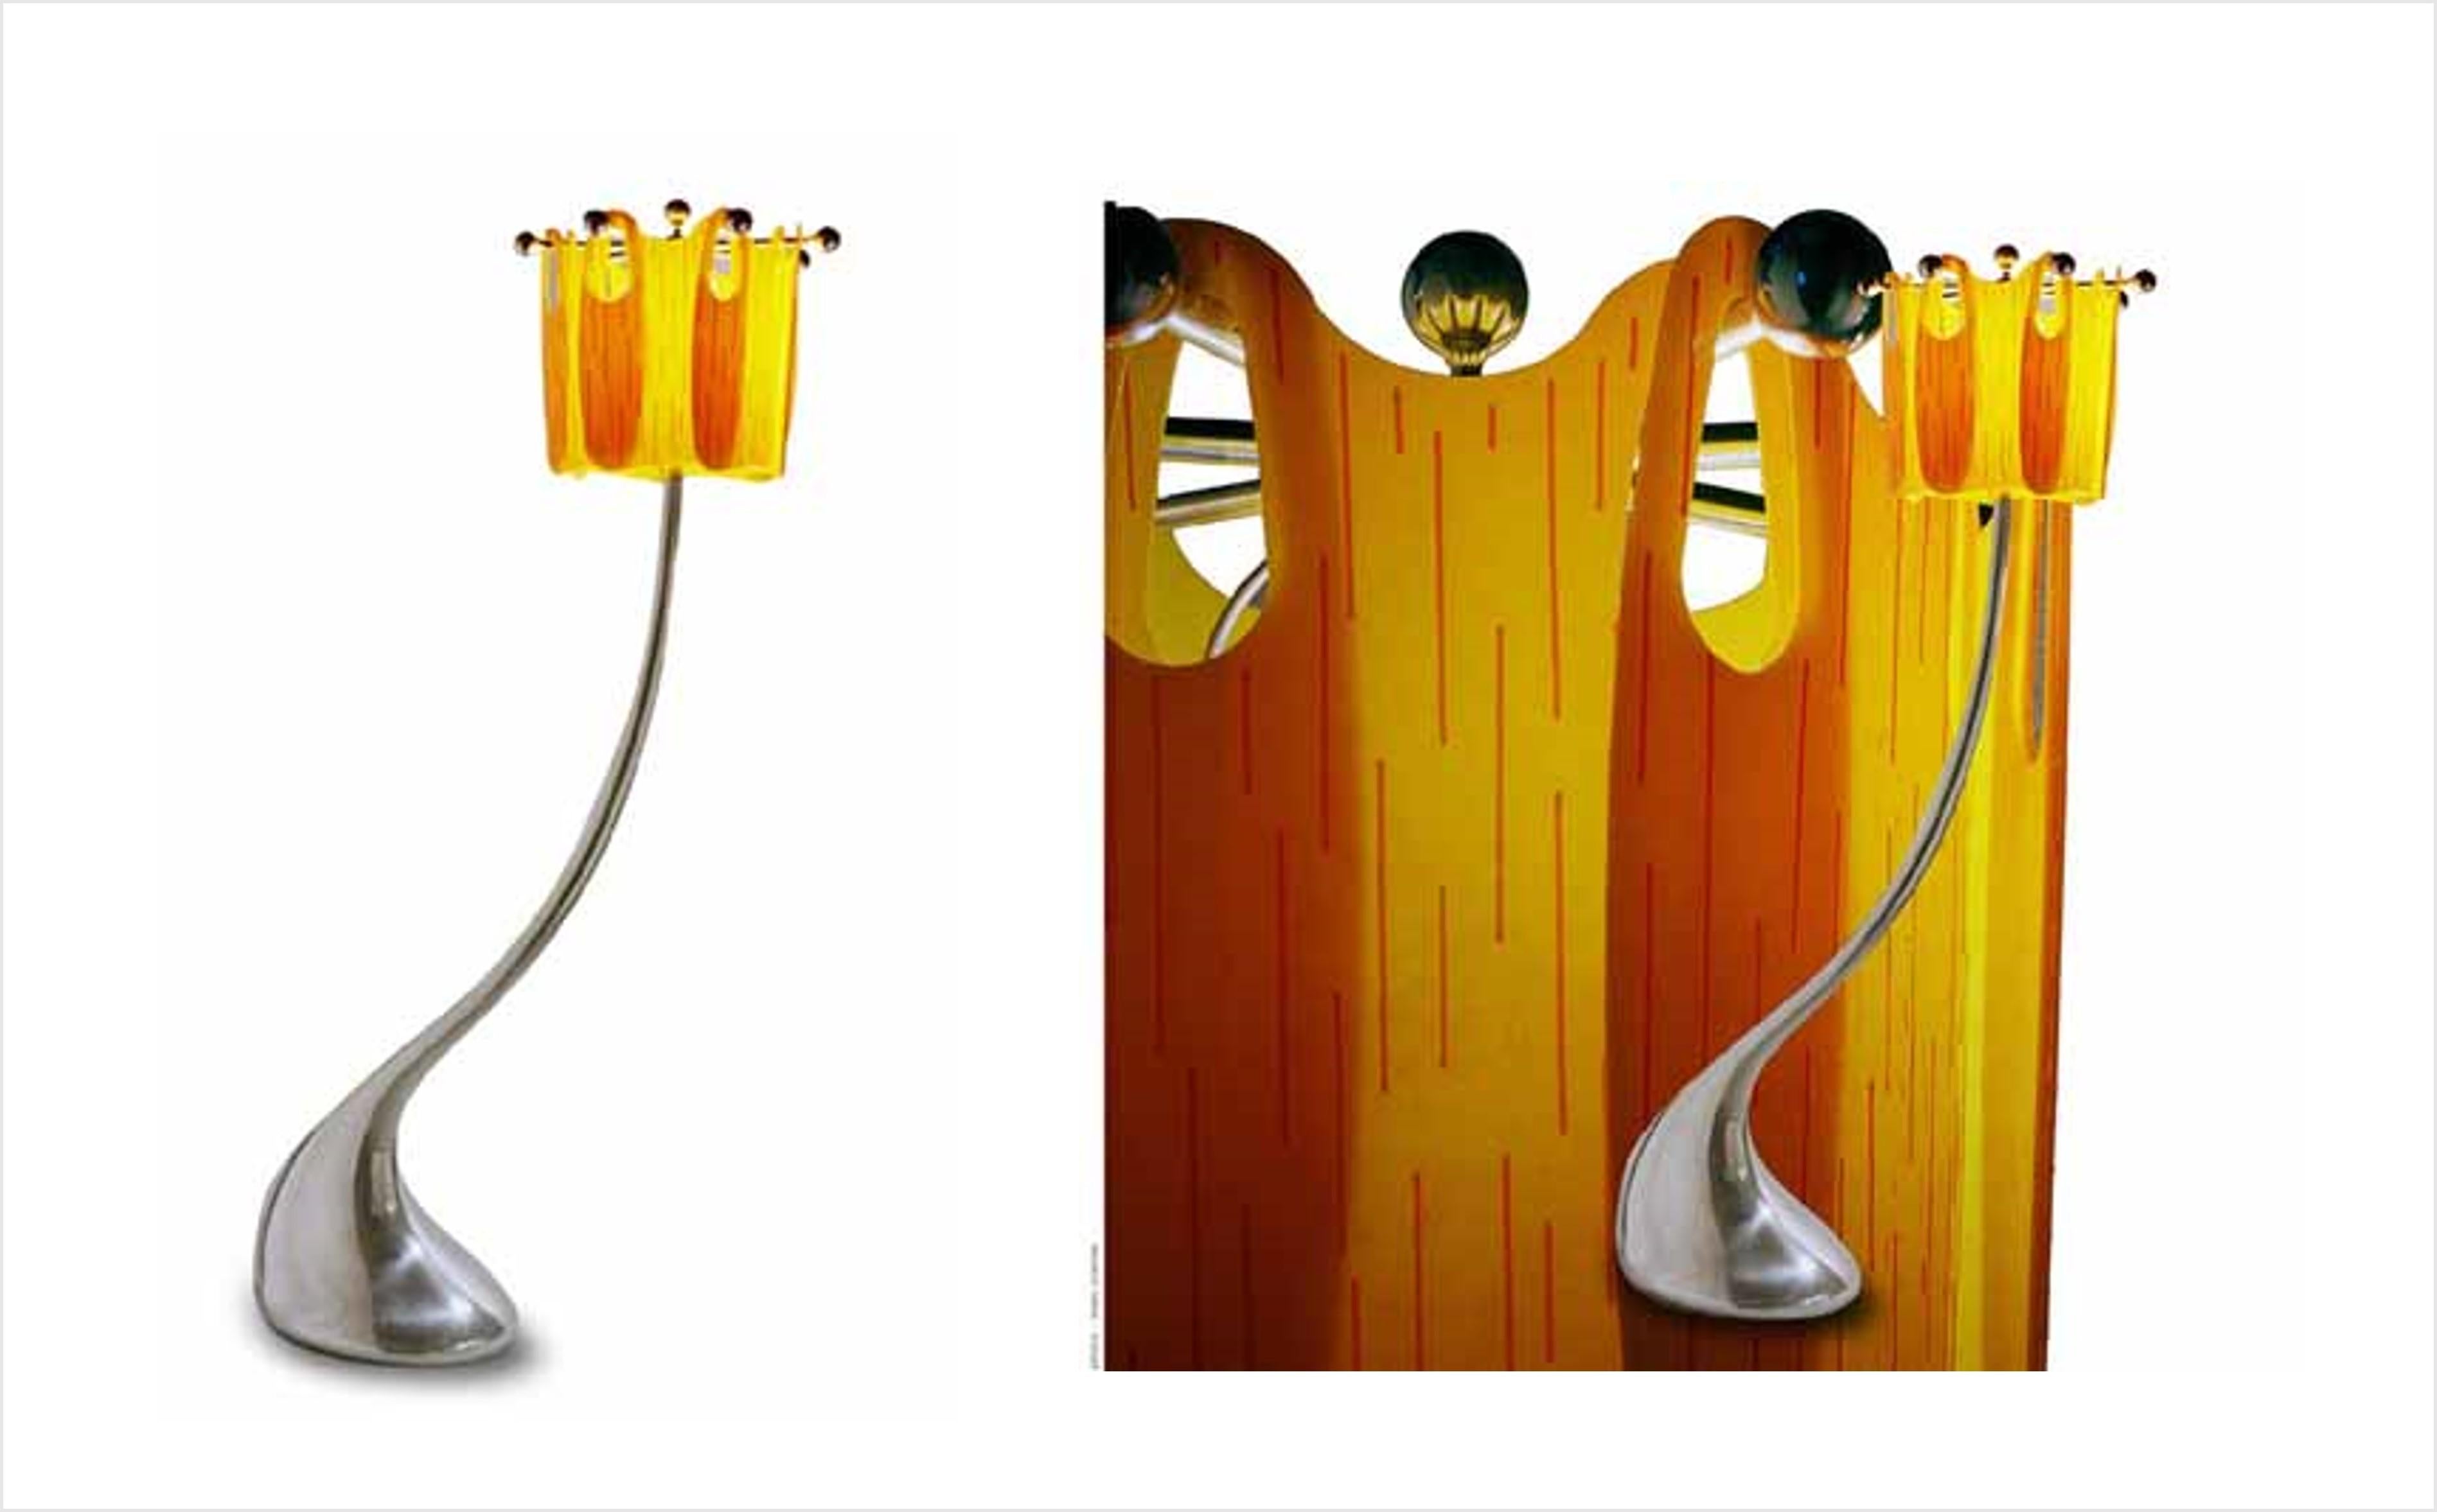 Jordan Mozer's whimsical, organic creations are coveted limited edition pieces. Anna-Mae, a cast-aluminum and fused glass floor lamp has a presence and personality; substantial and joyful. Anna-Mae's sinuous styling complements contemporary art and